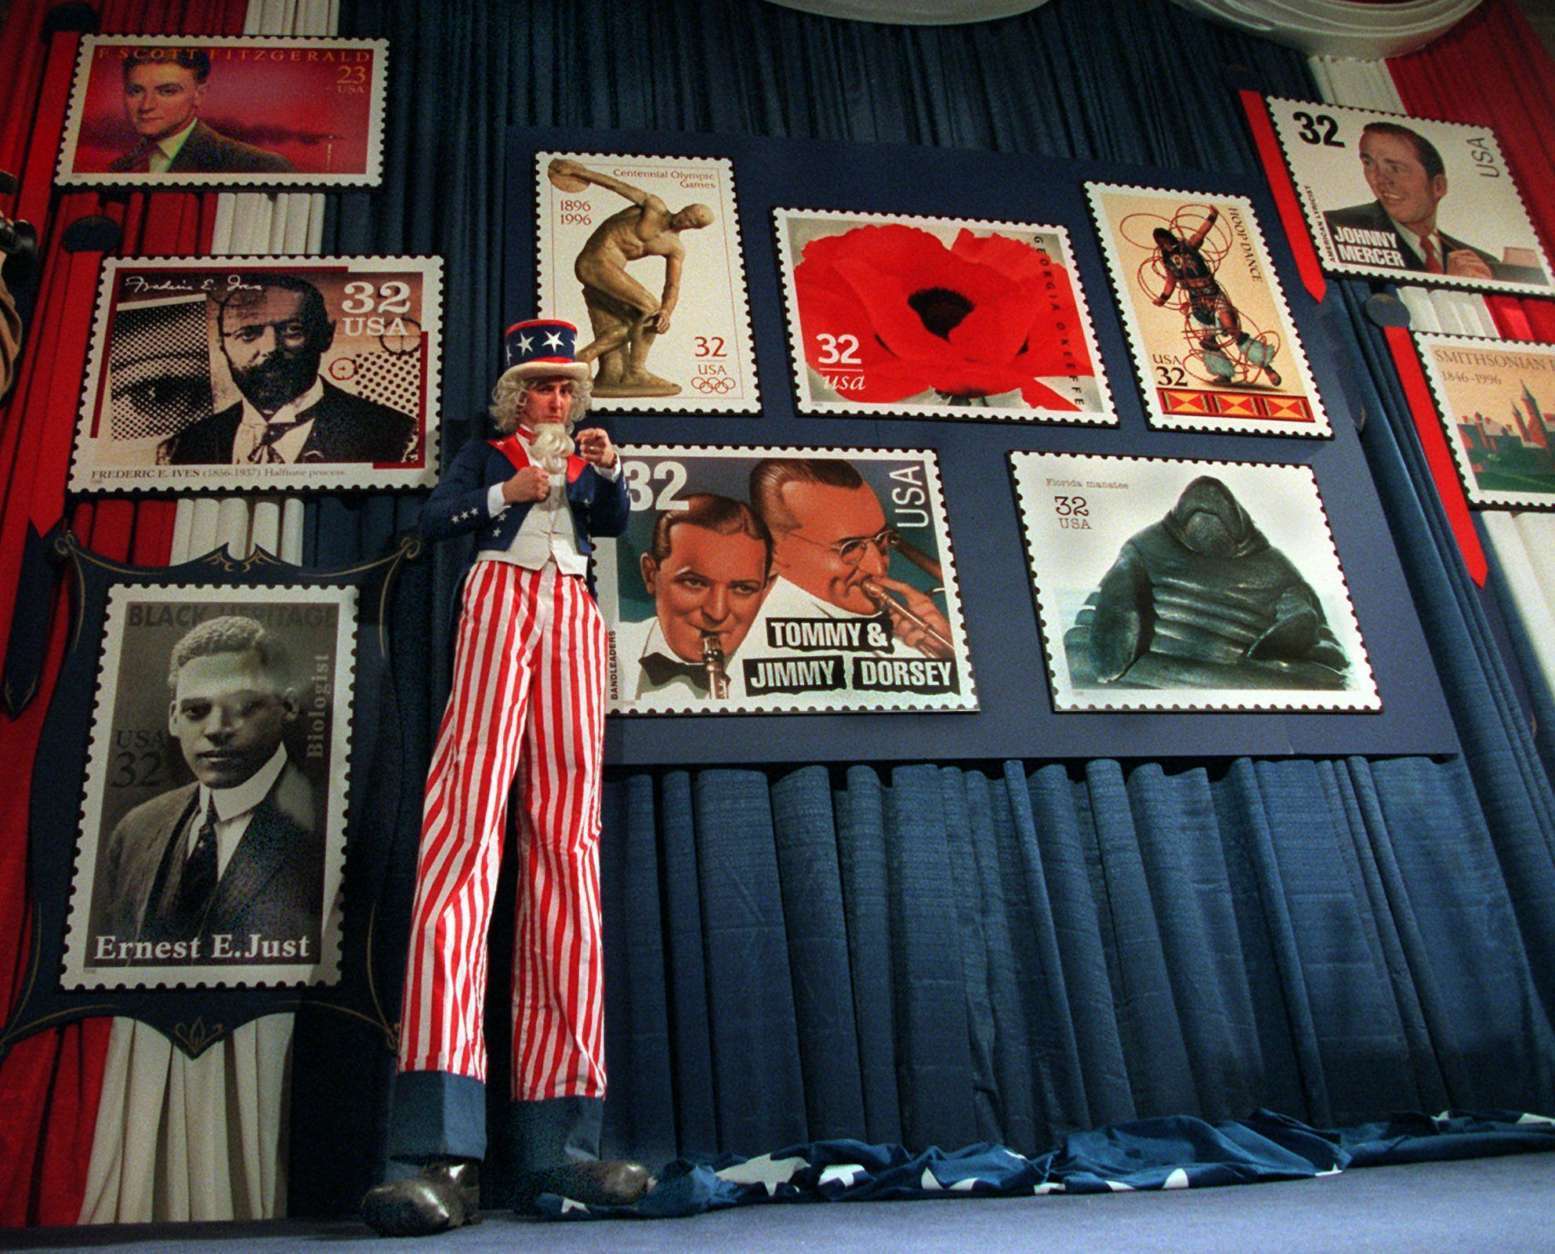 A stilted Uncle Sam, portrayed by Brian McNelis, stands in front of blow ups of proposed 1996 U.S. Postage Stamps during a news conference at the U.S. Postal Museum in Washington Tuesday Nov. 7, 1995 where the new designs were announced. (AP Photo/Charles Tasnadi)